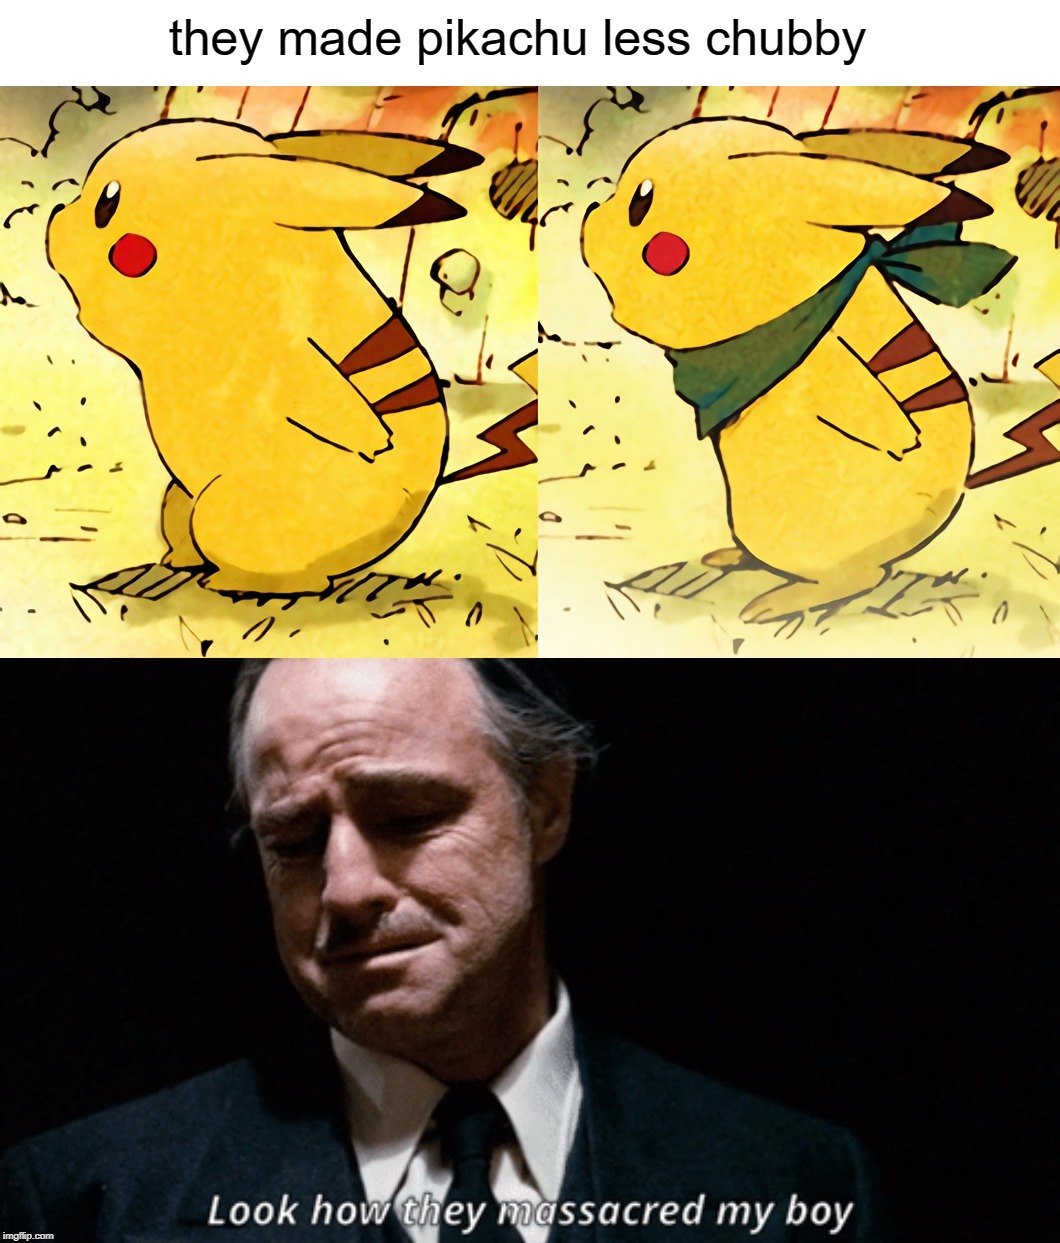 pikafew | they made pikachu less chubby | image tagged in pikachu,pokemon,why,nintendo,video games,gaming | made w/ Imgflip meme maker